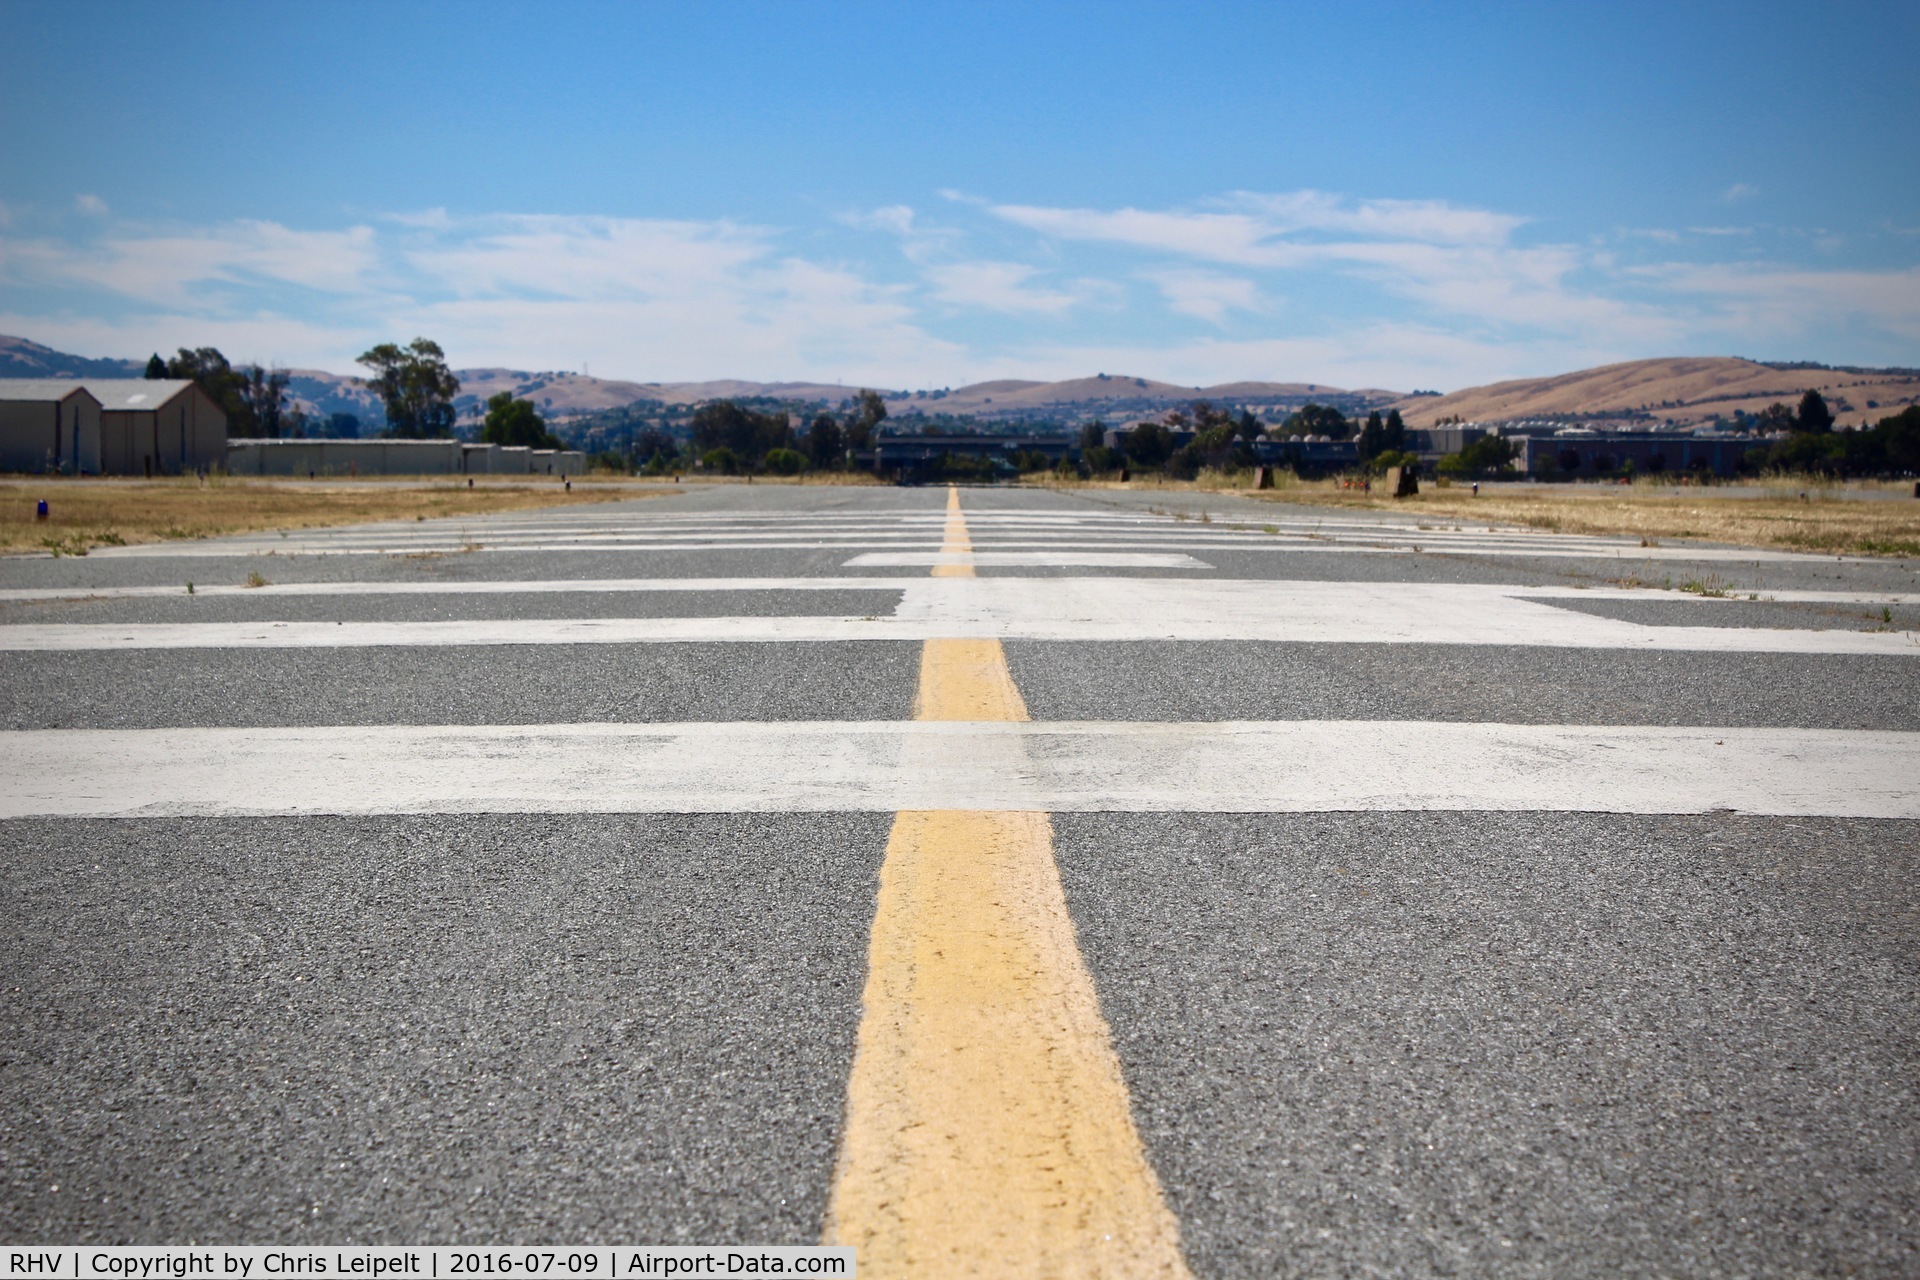 Reid-hillview Of Santa Clara County Airport (RHV) - On taxiway Y at Reid Hillview Airport, San Jose, CA.